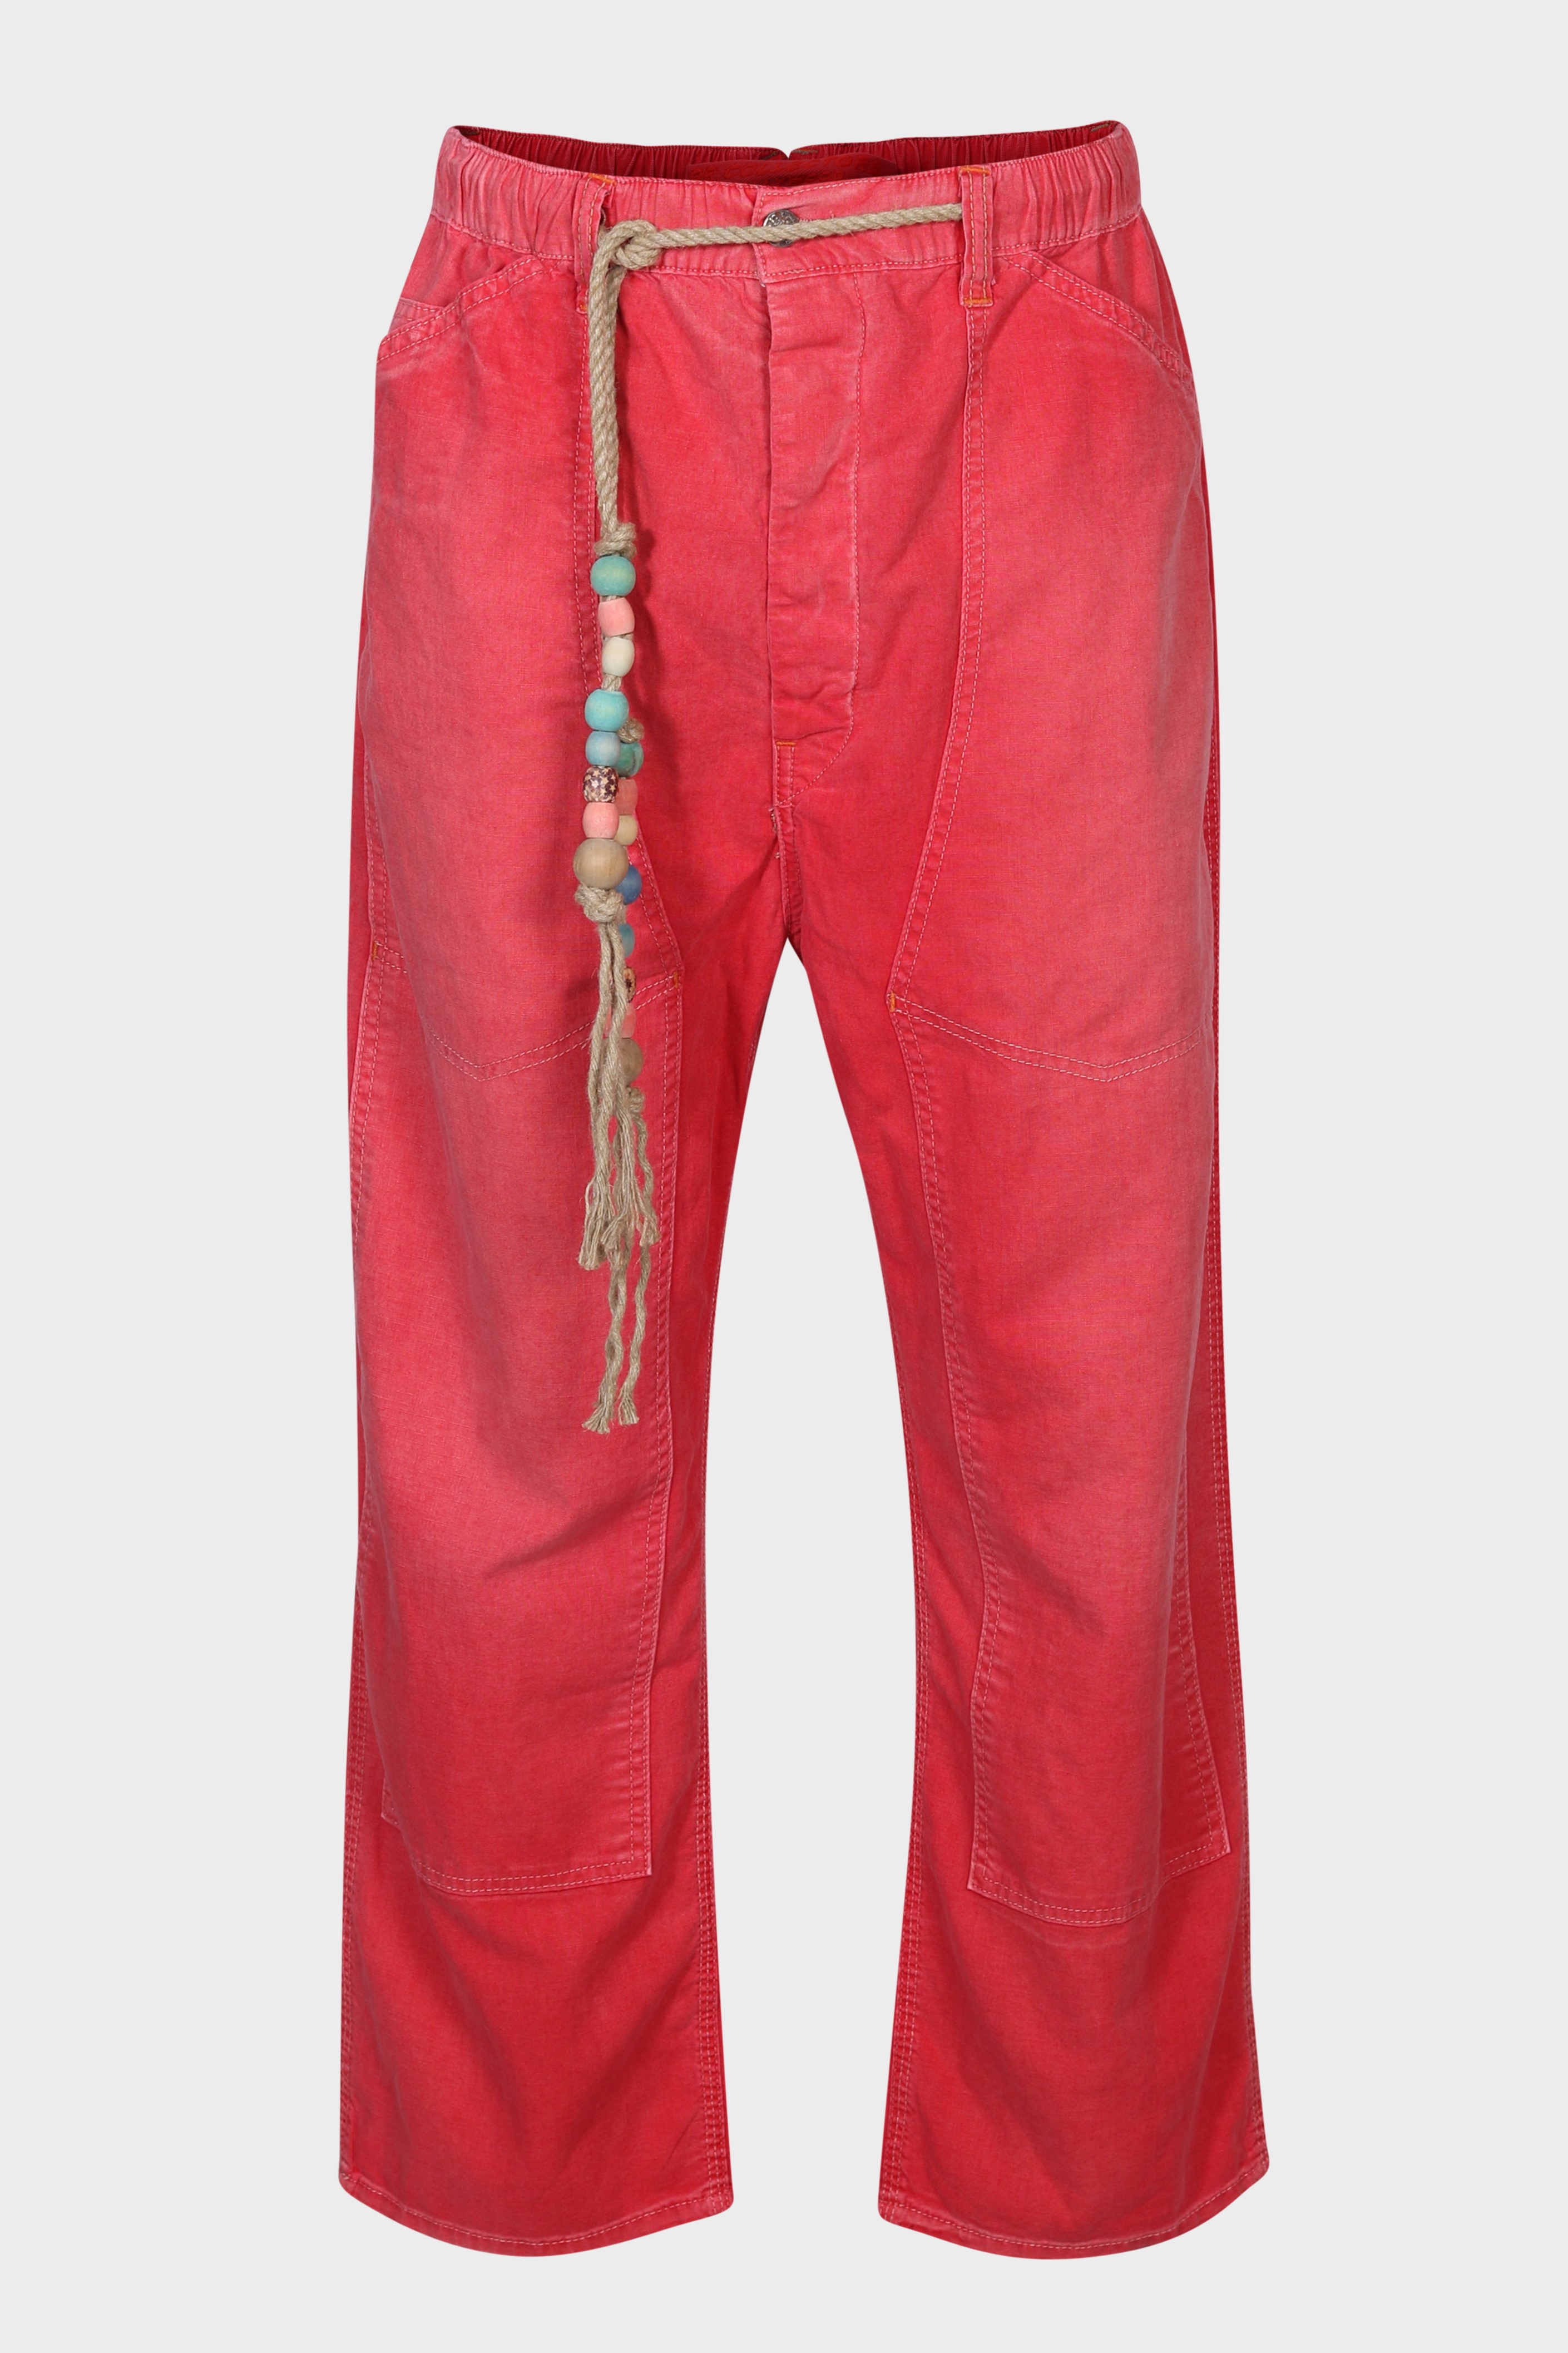 DR. COLLECTORS Carpenter Organic Cotton Sunfaded Red XS